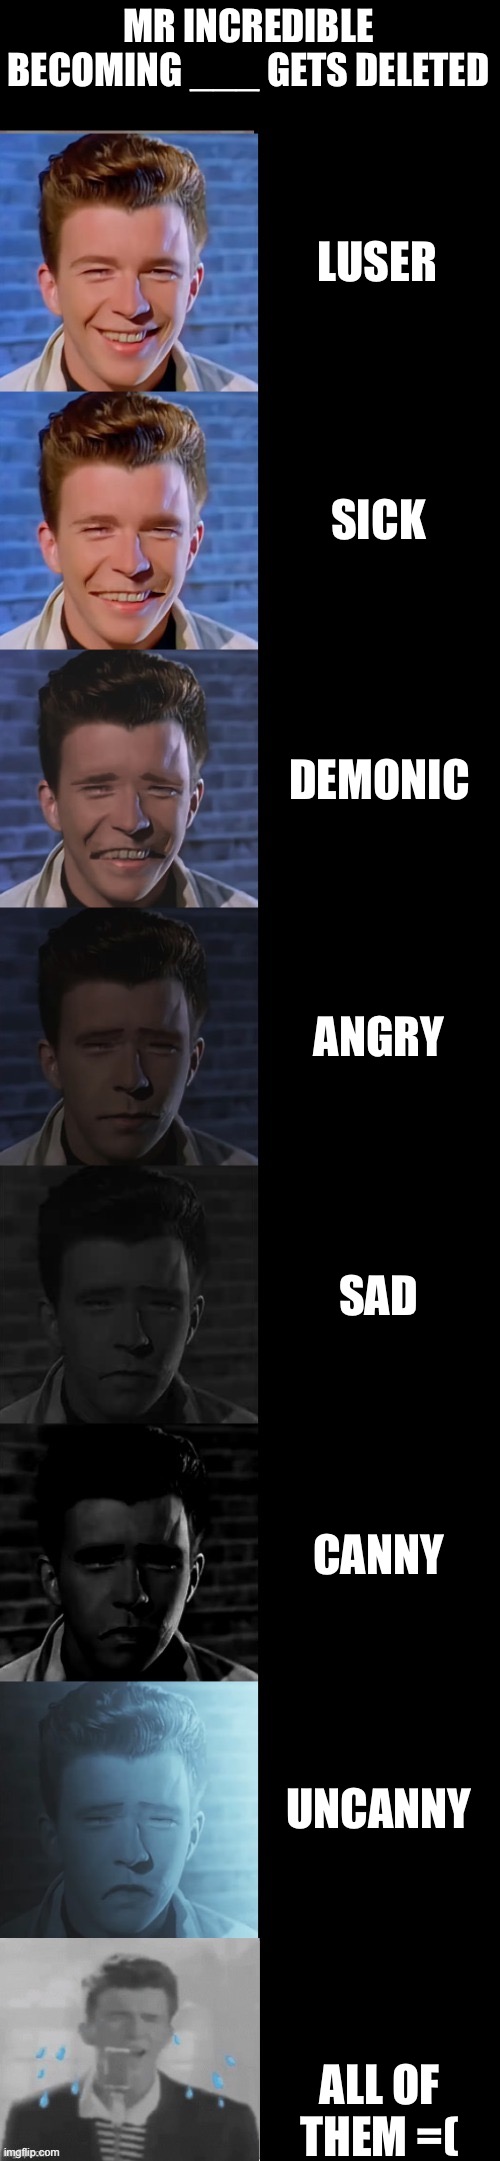 Rick Astley Becoming Sad True Form | MR INCREDIBLE BECOMING ___ GETS DELETED; LUSER; SICK; DEMONIC; ANGRY; SAD; CANNY; UNCANNY; ALL OF THEM =( | image tagged in rick astley becoming sad true form | made w/ Imgflip meme maker